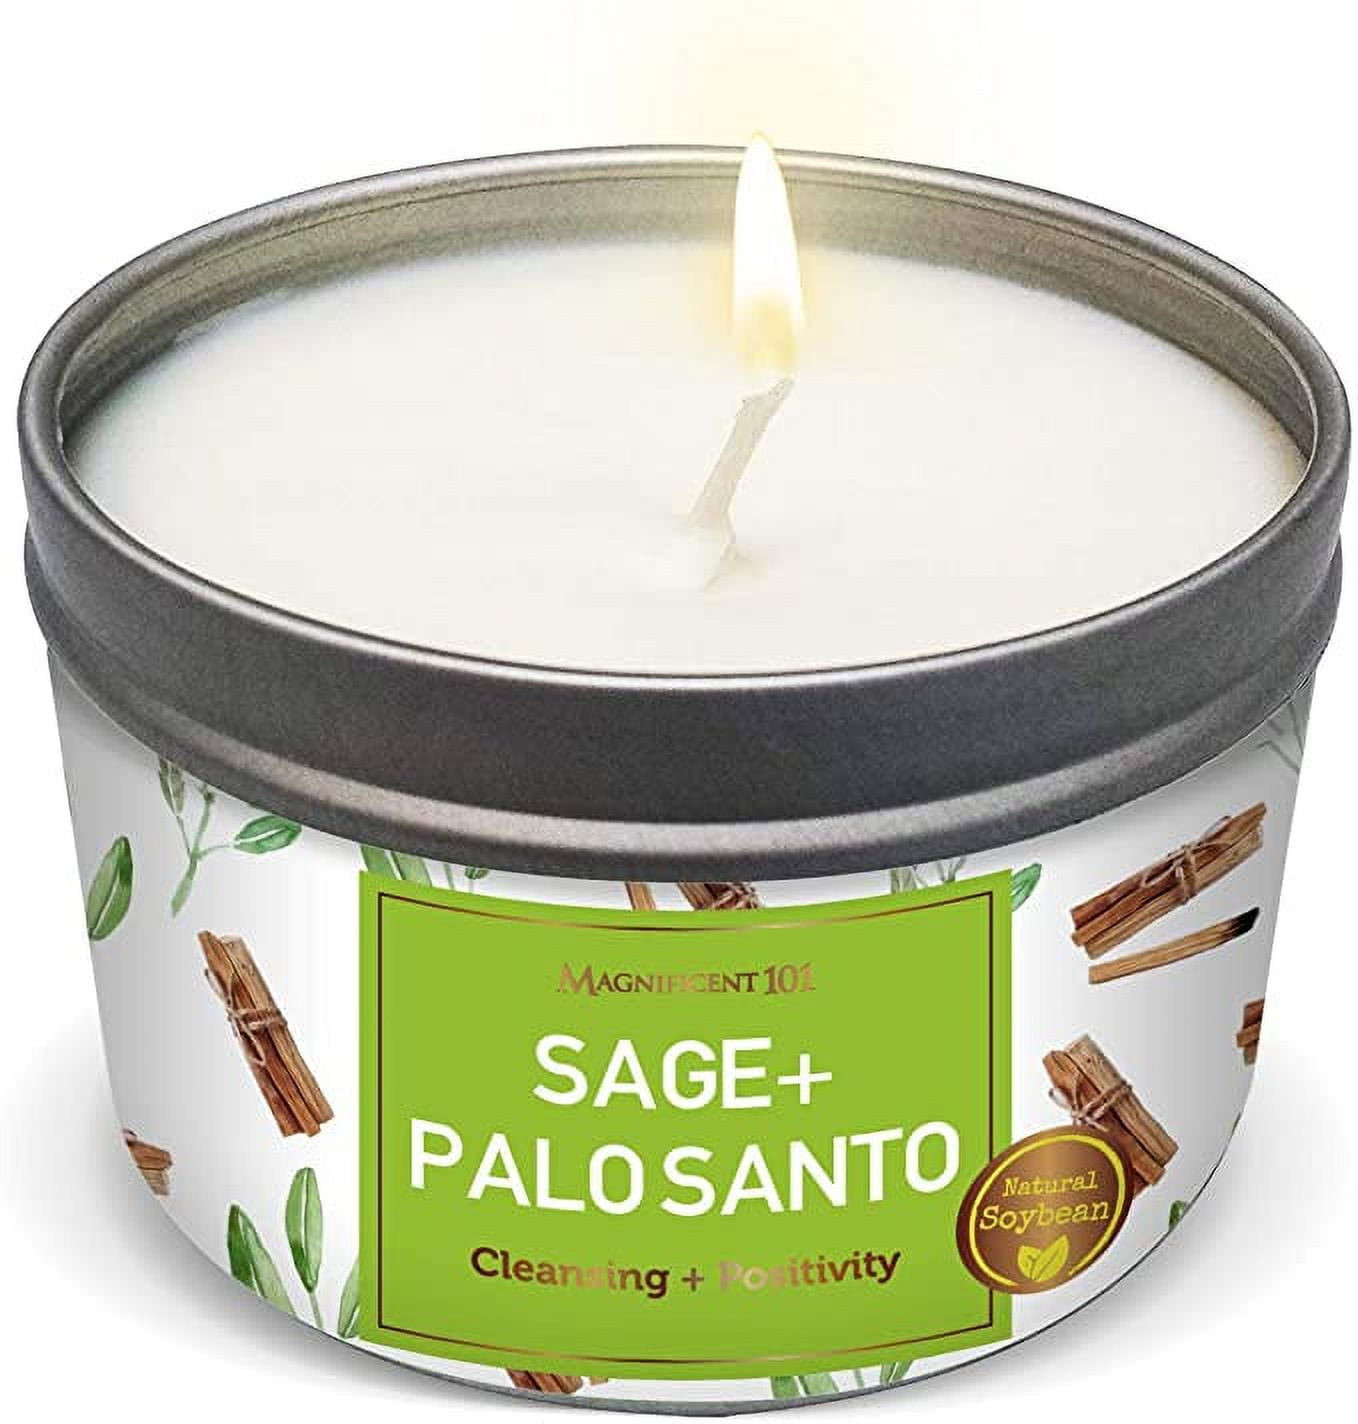 My 1st Essential Oils candle. Palo Santo & Sage. I used about 200